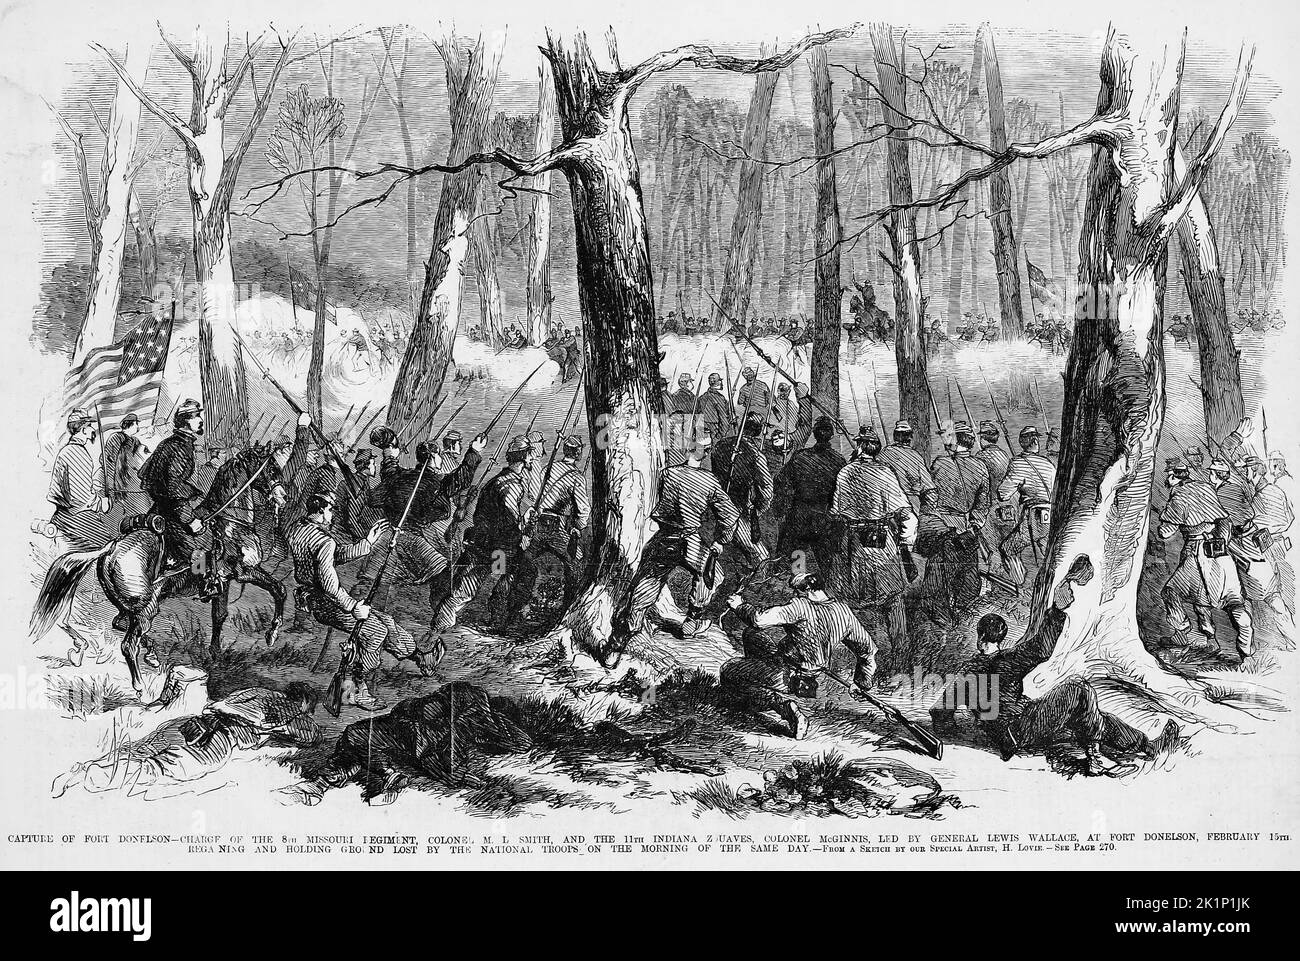 Capture of Fort Donelson, Tennessee - Charge of the 8th Missouri Regiment, Colonel Morgan Lewis Smith, and the 11th Indiana Zouaves, Colonel George Francis McGinnis, led by General Lewis 'Lew' Wallace, at Fort Donelson, February 15th, 1862, regaining and holding ground lost by the National troops on the morning of the same day. Battle of Fort Donelson. 19th century American Civil War illustration from Frank Leslie's Illustrated Newspaper Stock Photo